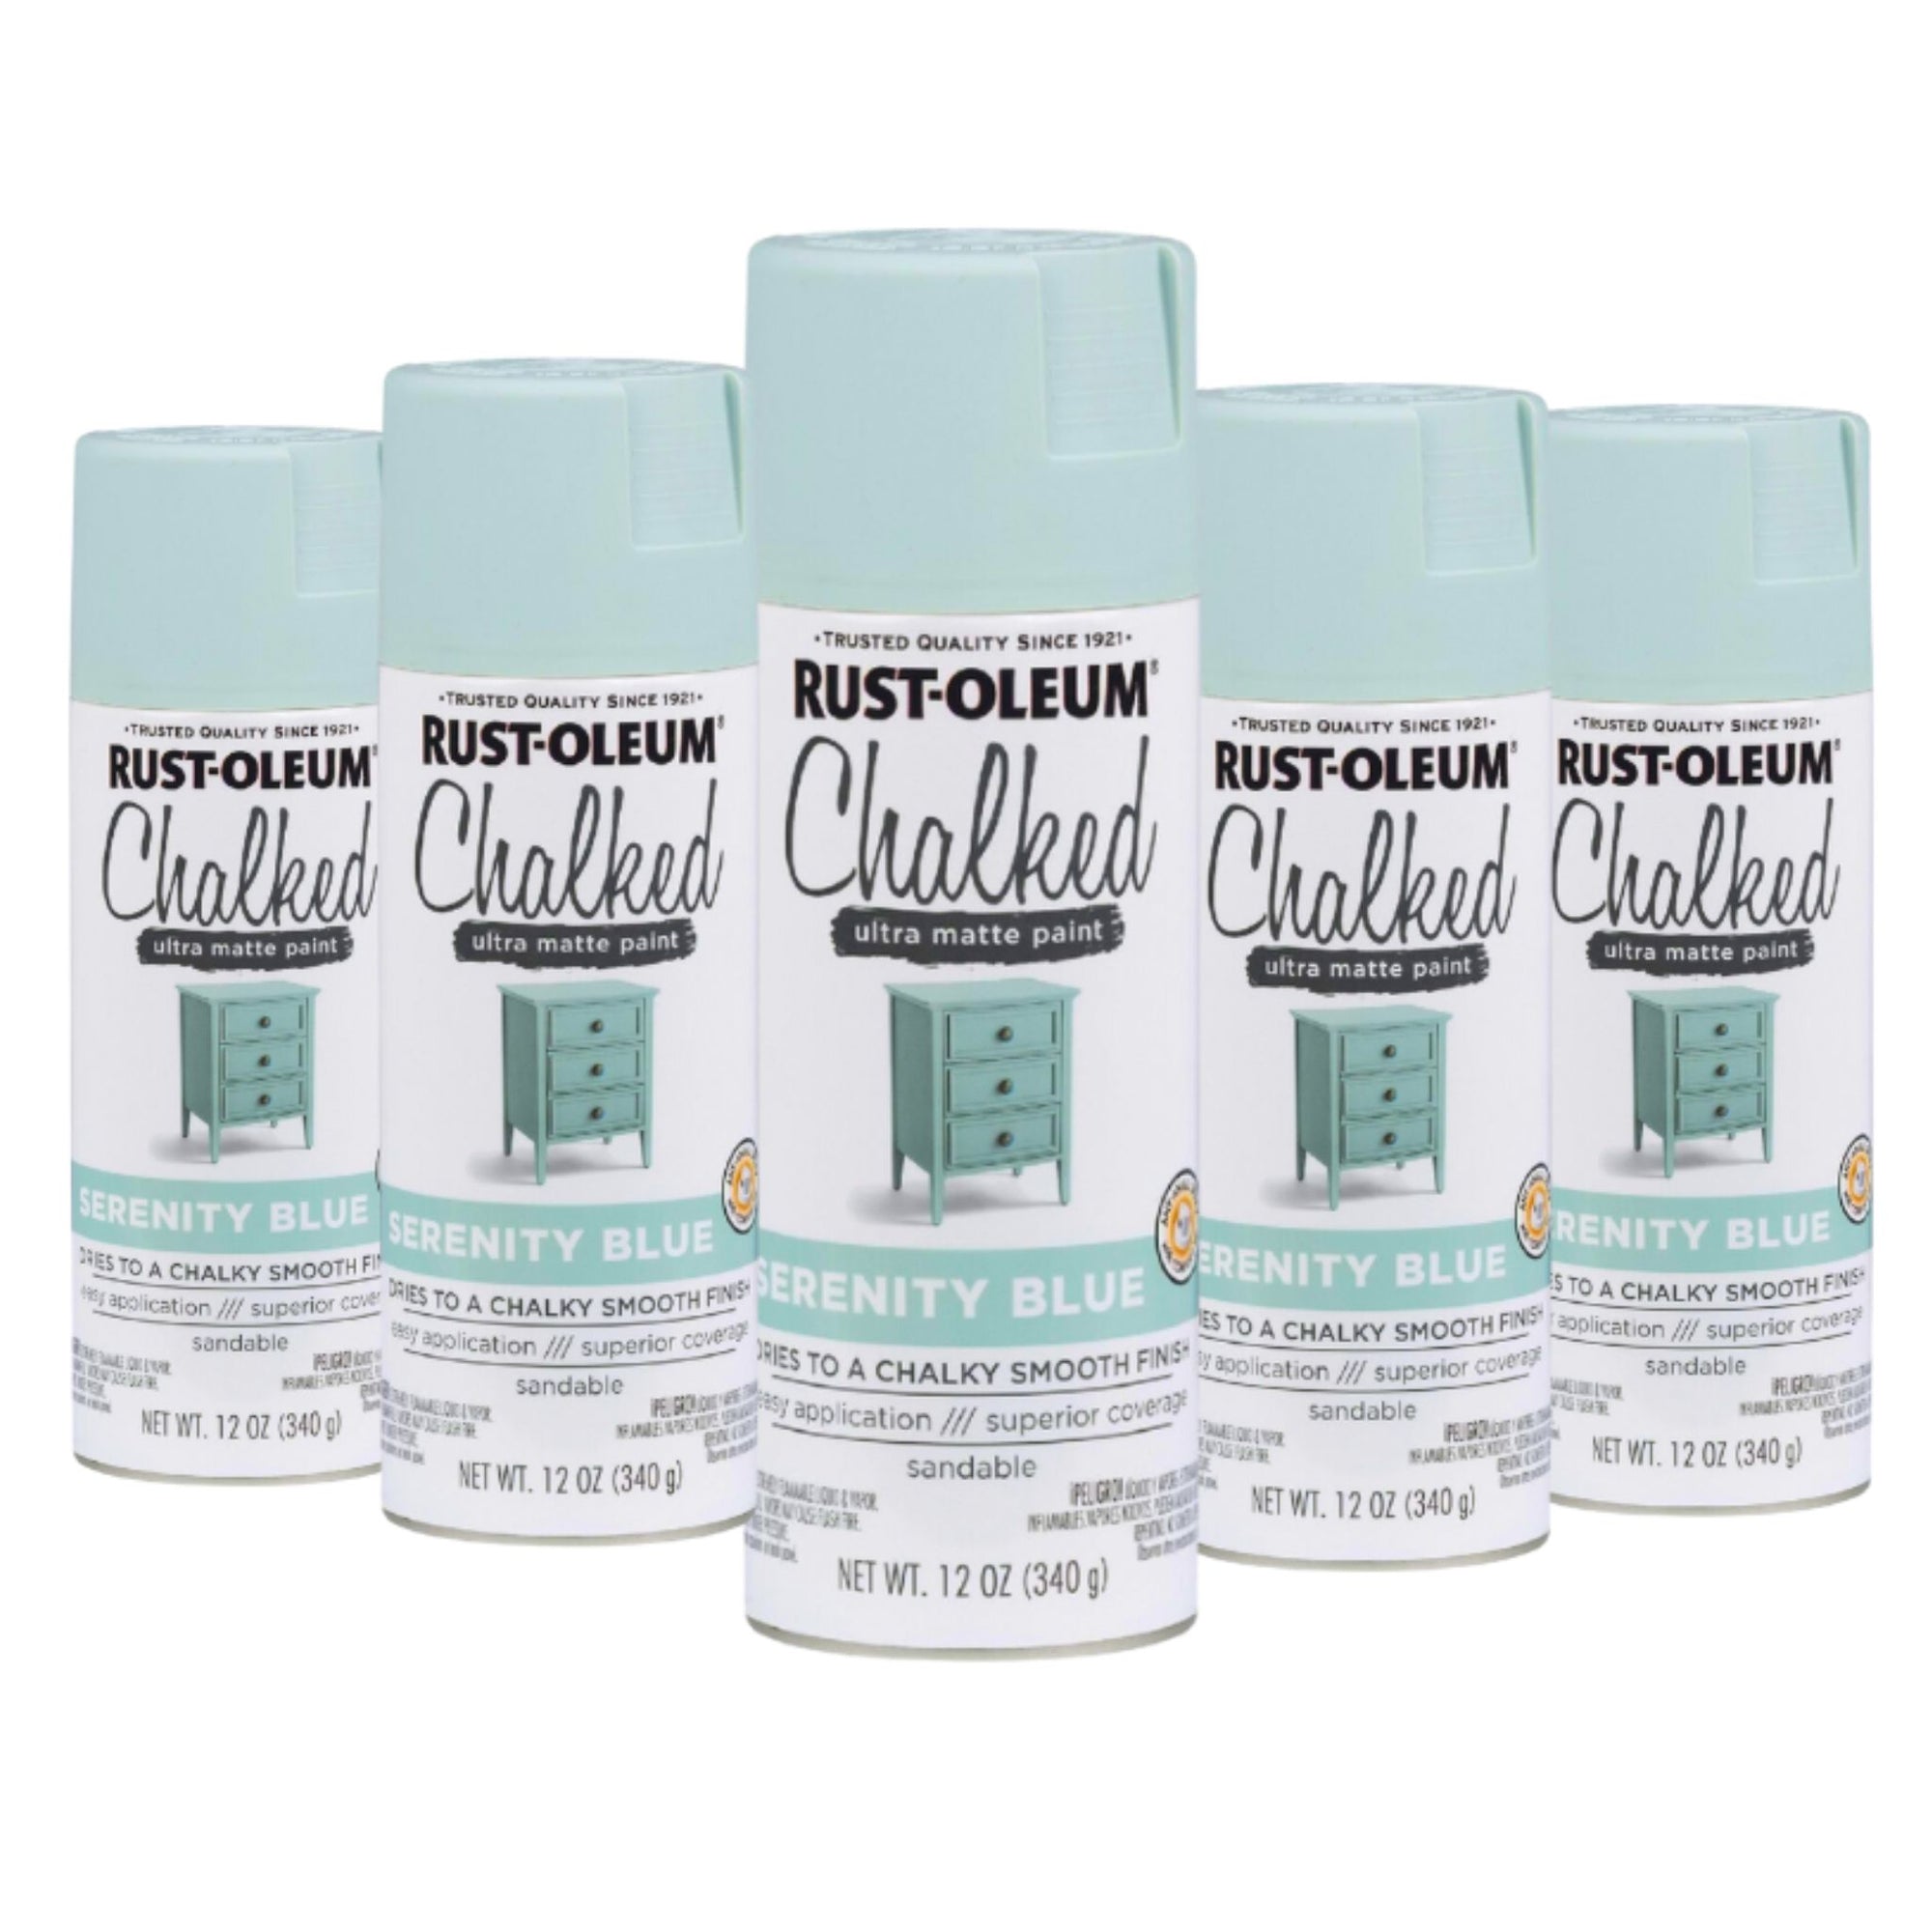 6 cans - RUSTOLEUM CHALKED PAINT Ultra Matte Paint | SERENITY BLUE - South East Clearance Centre